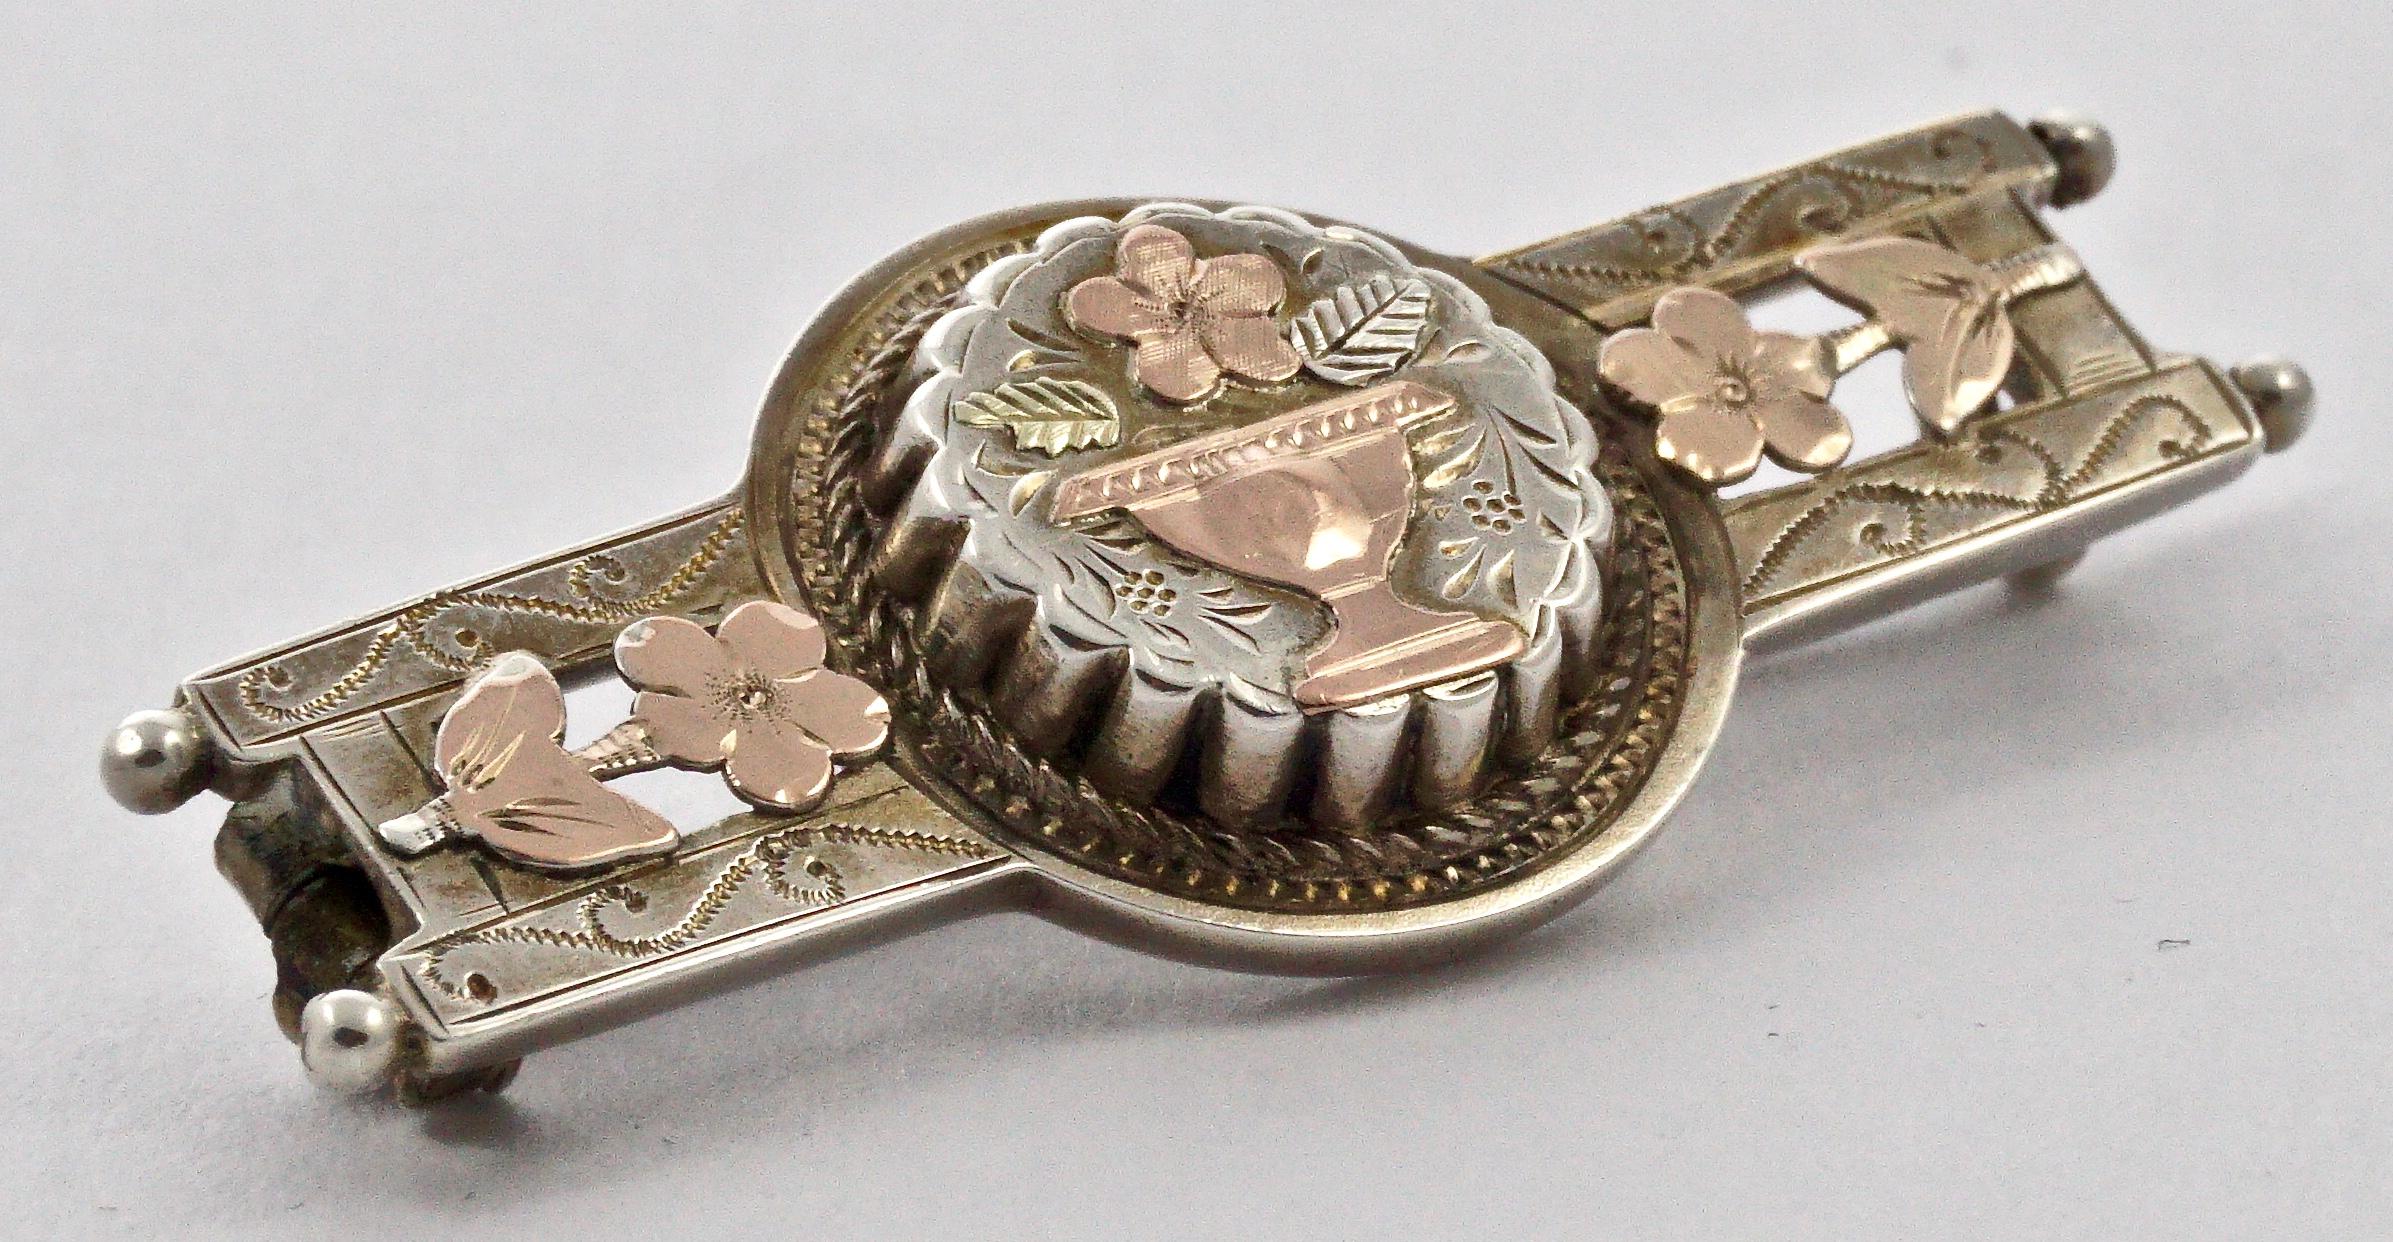 Wonderful Victorian hand chased ornate sterling silver bar brooch, with a lovely vase, flowers and leaves gilded in rose gold and yellow gold. Measuring length 4cm / 1.6 inches by width 1.6cm / .6 inch. The 